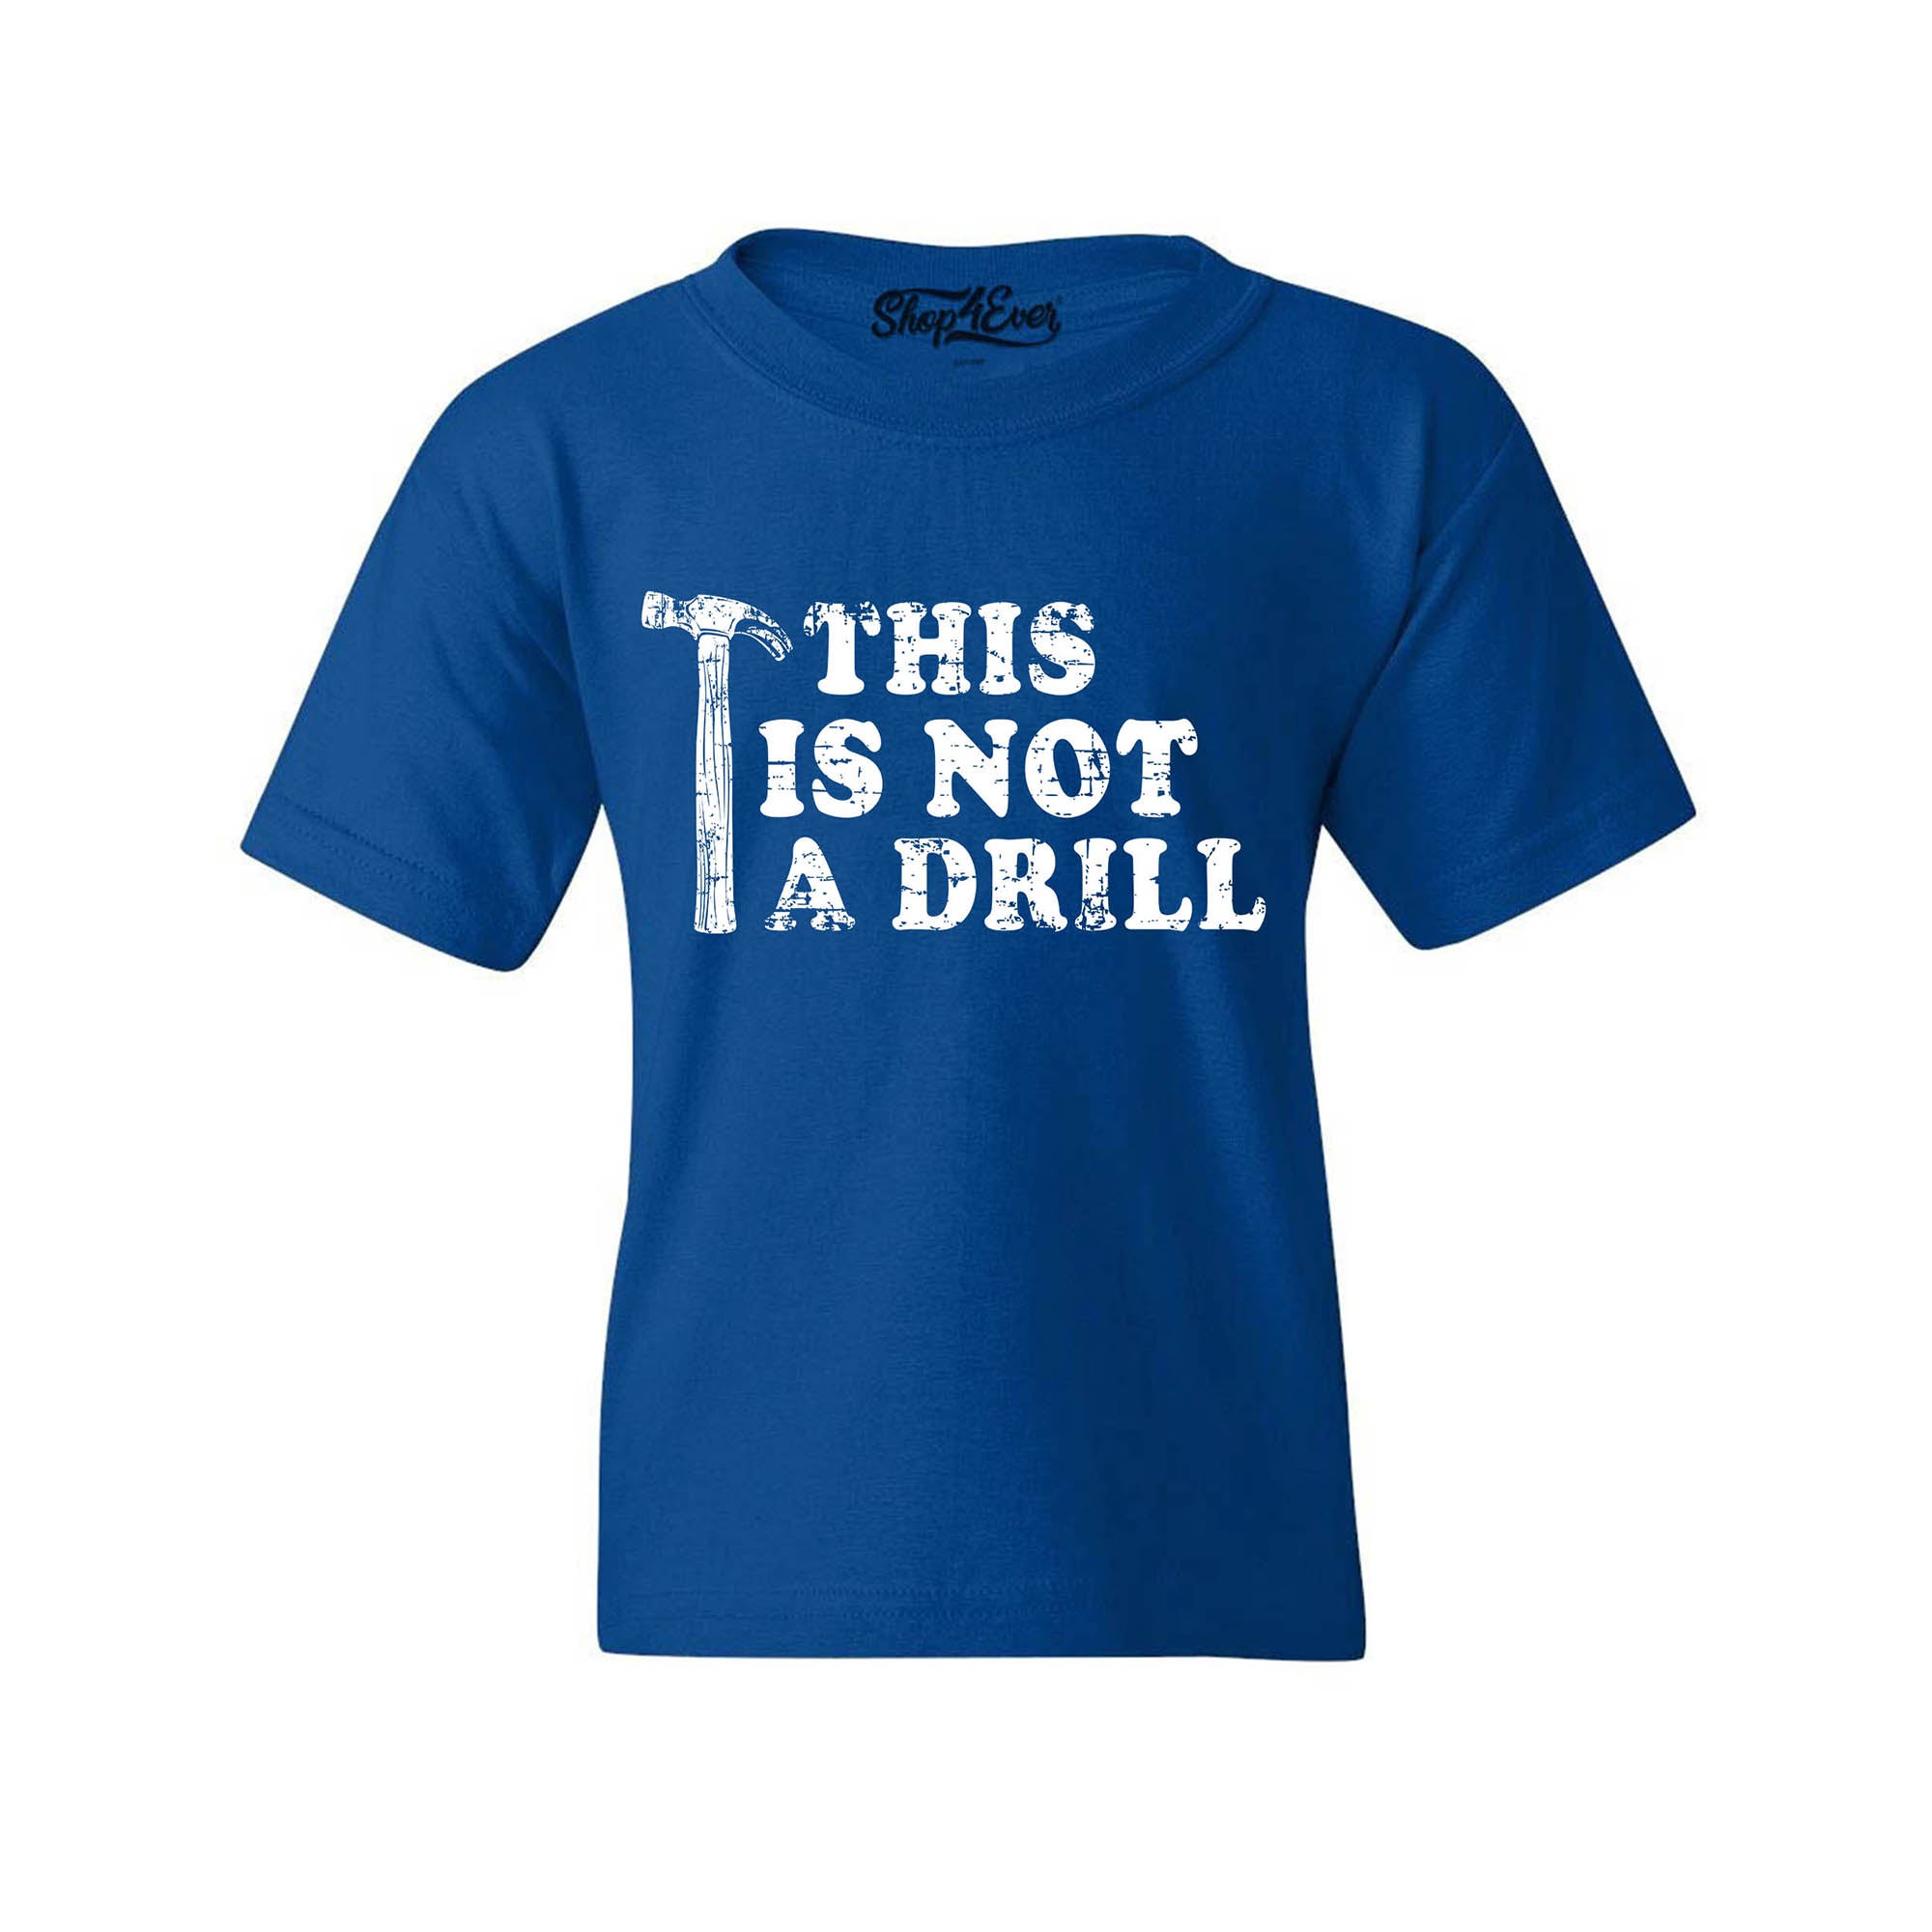 This is Not a Drill Kids Child Funny Youth's T-Shirt